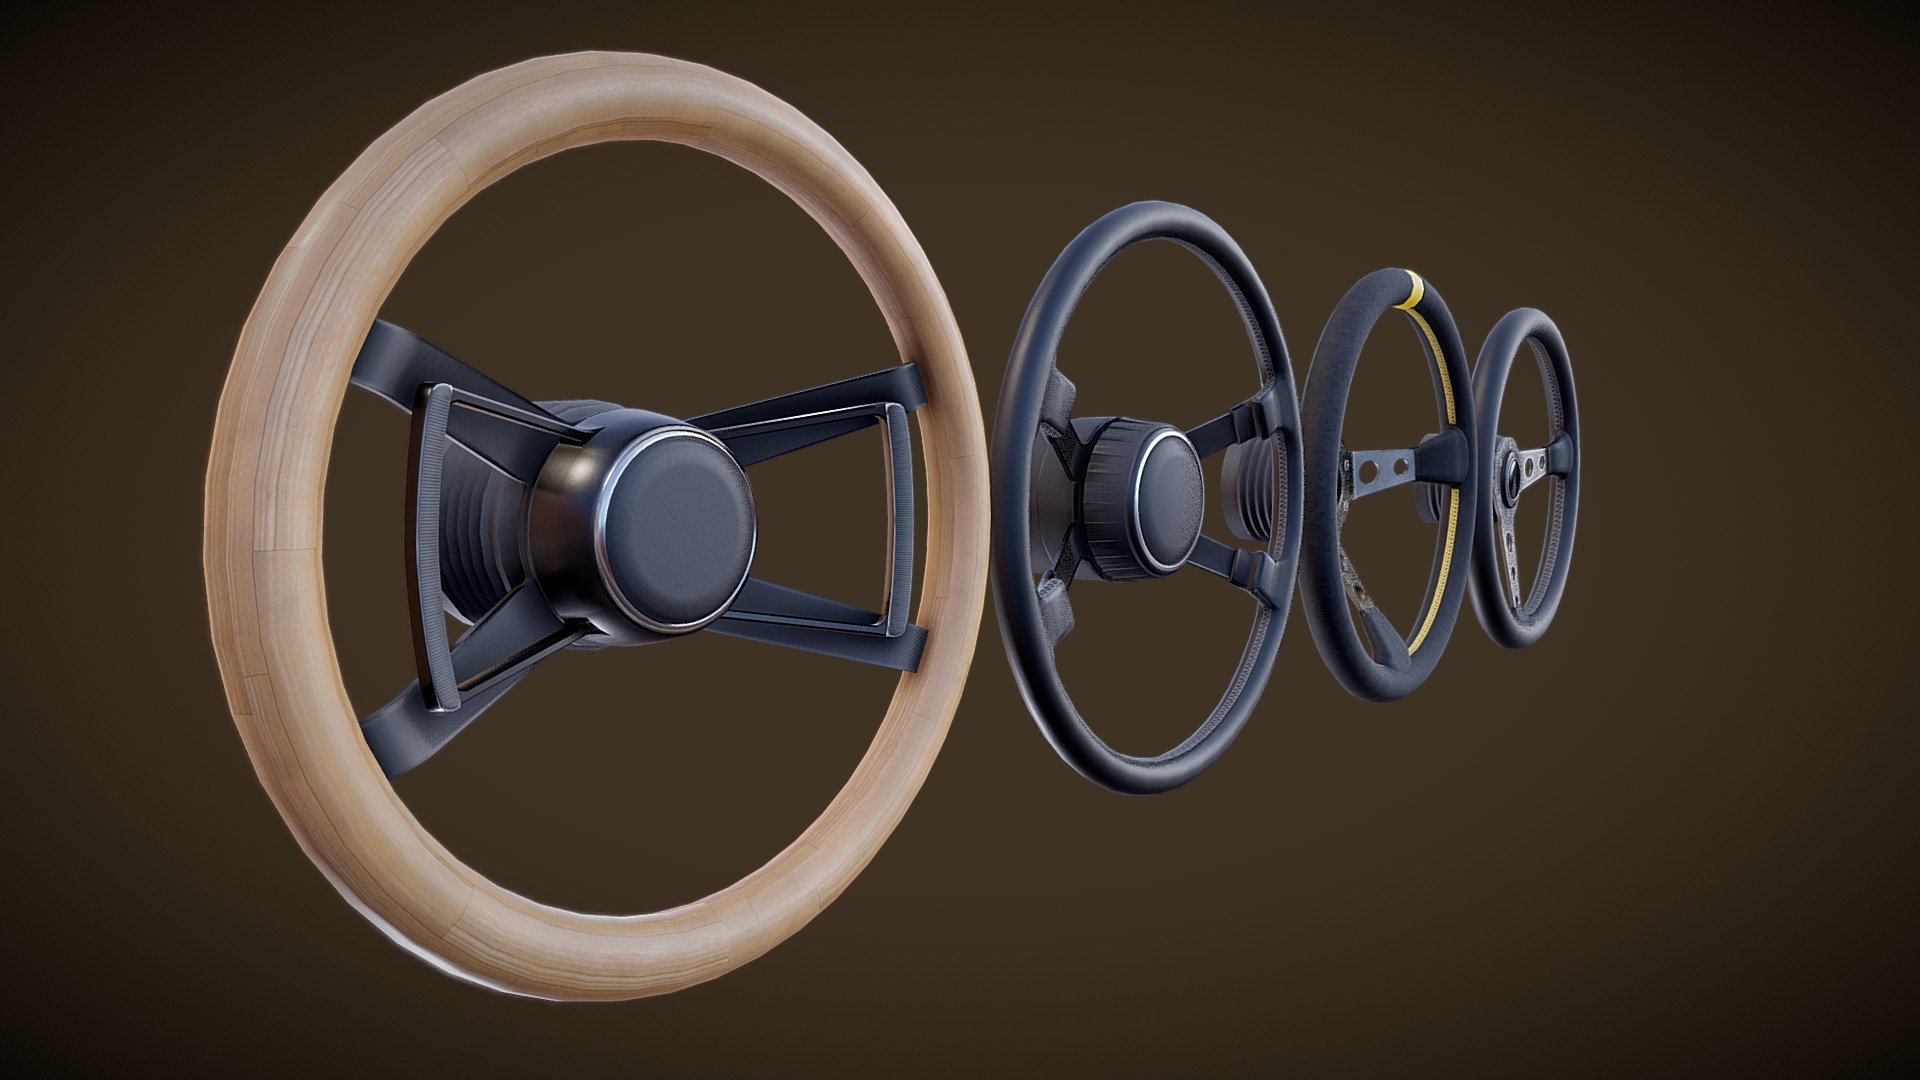 The three famous amateur racing wheels for 911 backdates. Will fit anywhere (as the manufacturers say :) ). Includes Papillon Wood, Papillon Classic, Momo 07 and Momo Prototipo.
I made those for the Backdate and the 911SC models. Gameready, textures are PBR, 2K 3d model